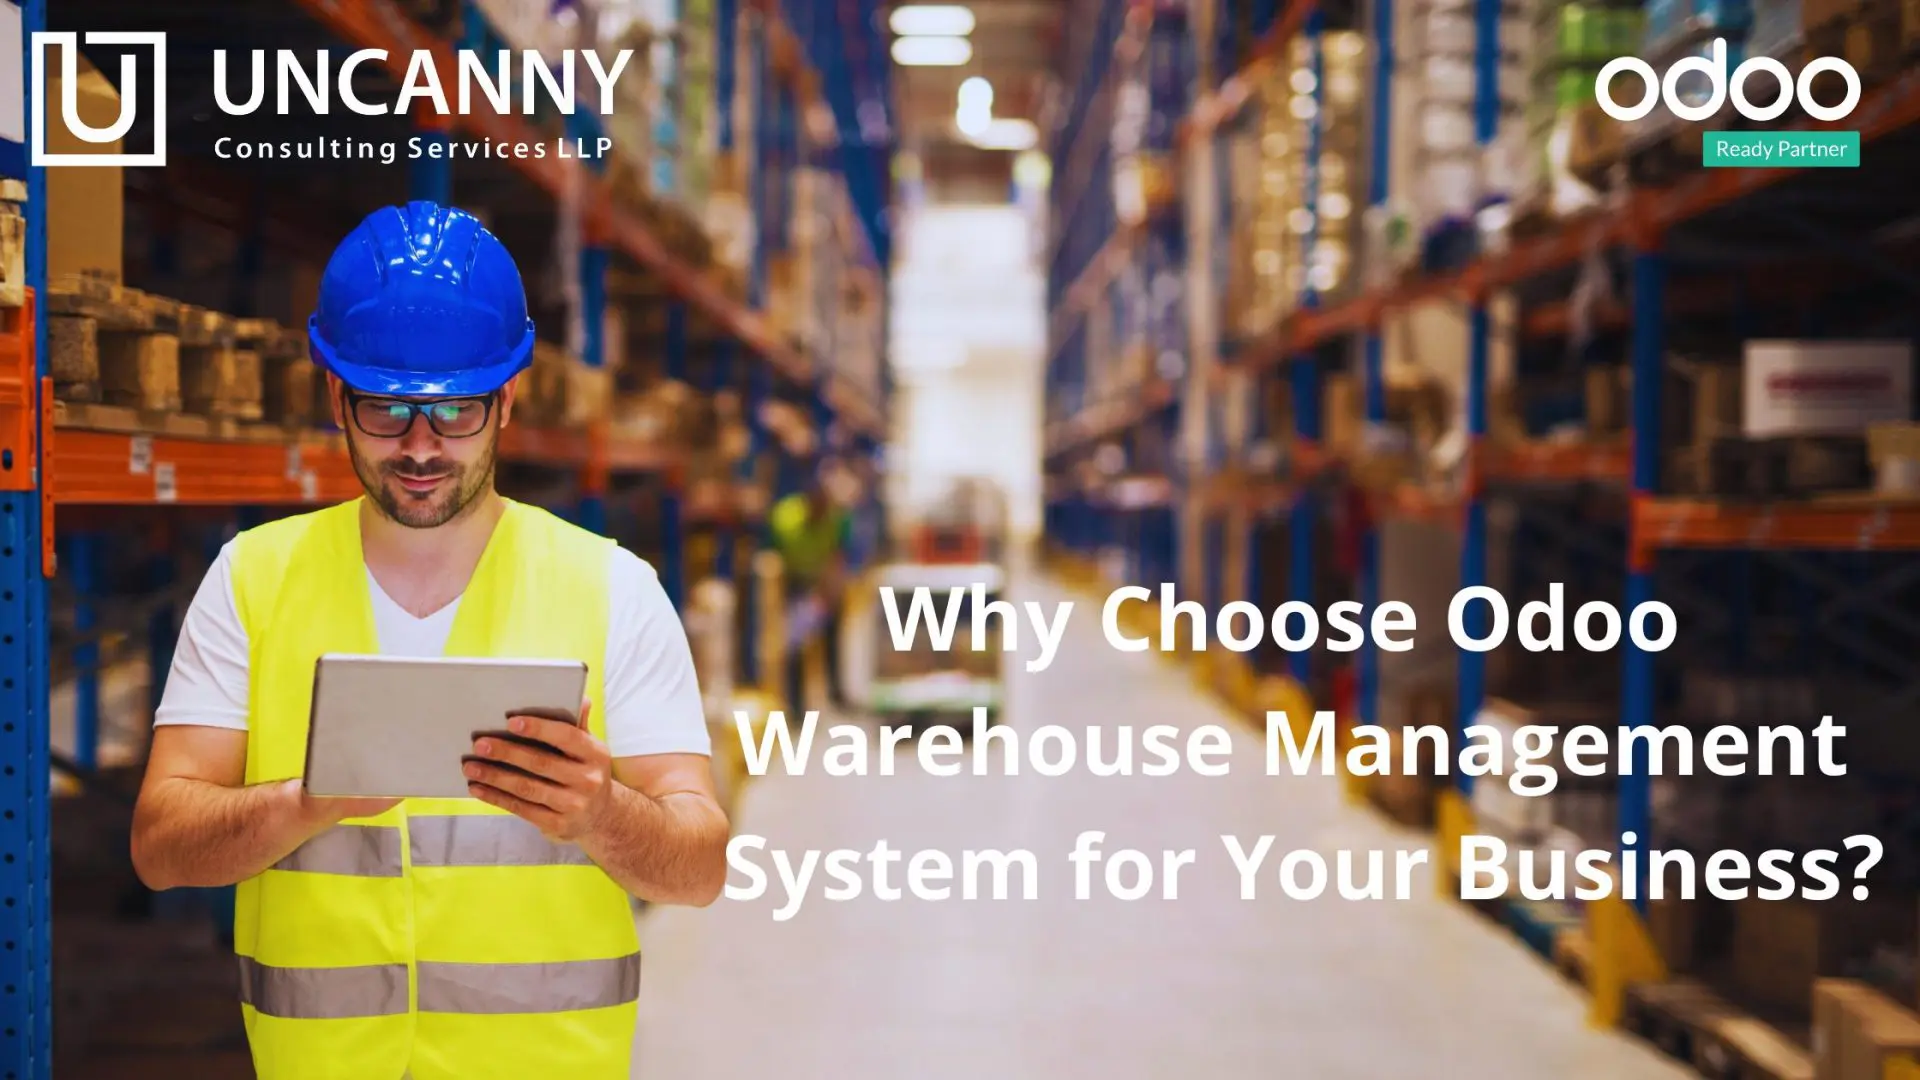 Why Choose Odoo Warehouse Management System for Your Business?